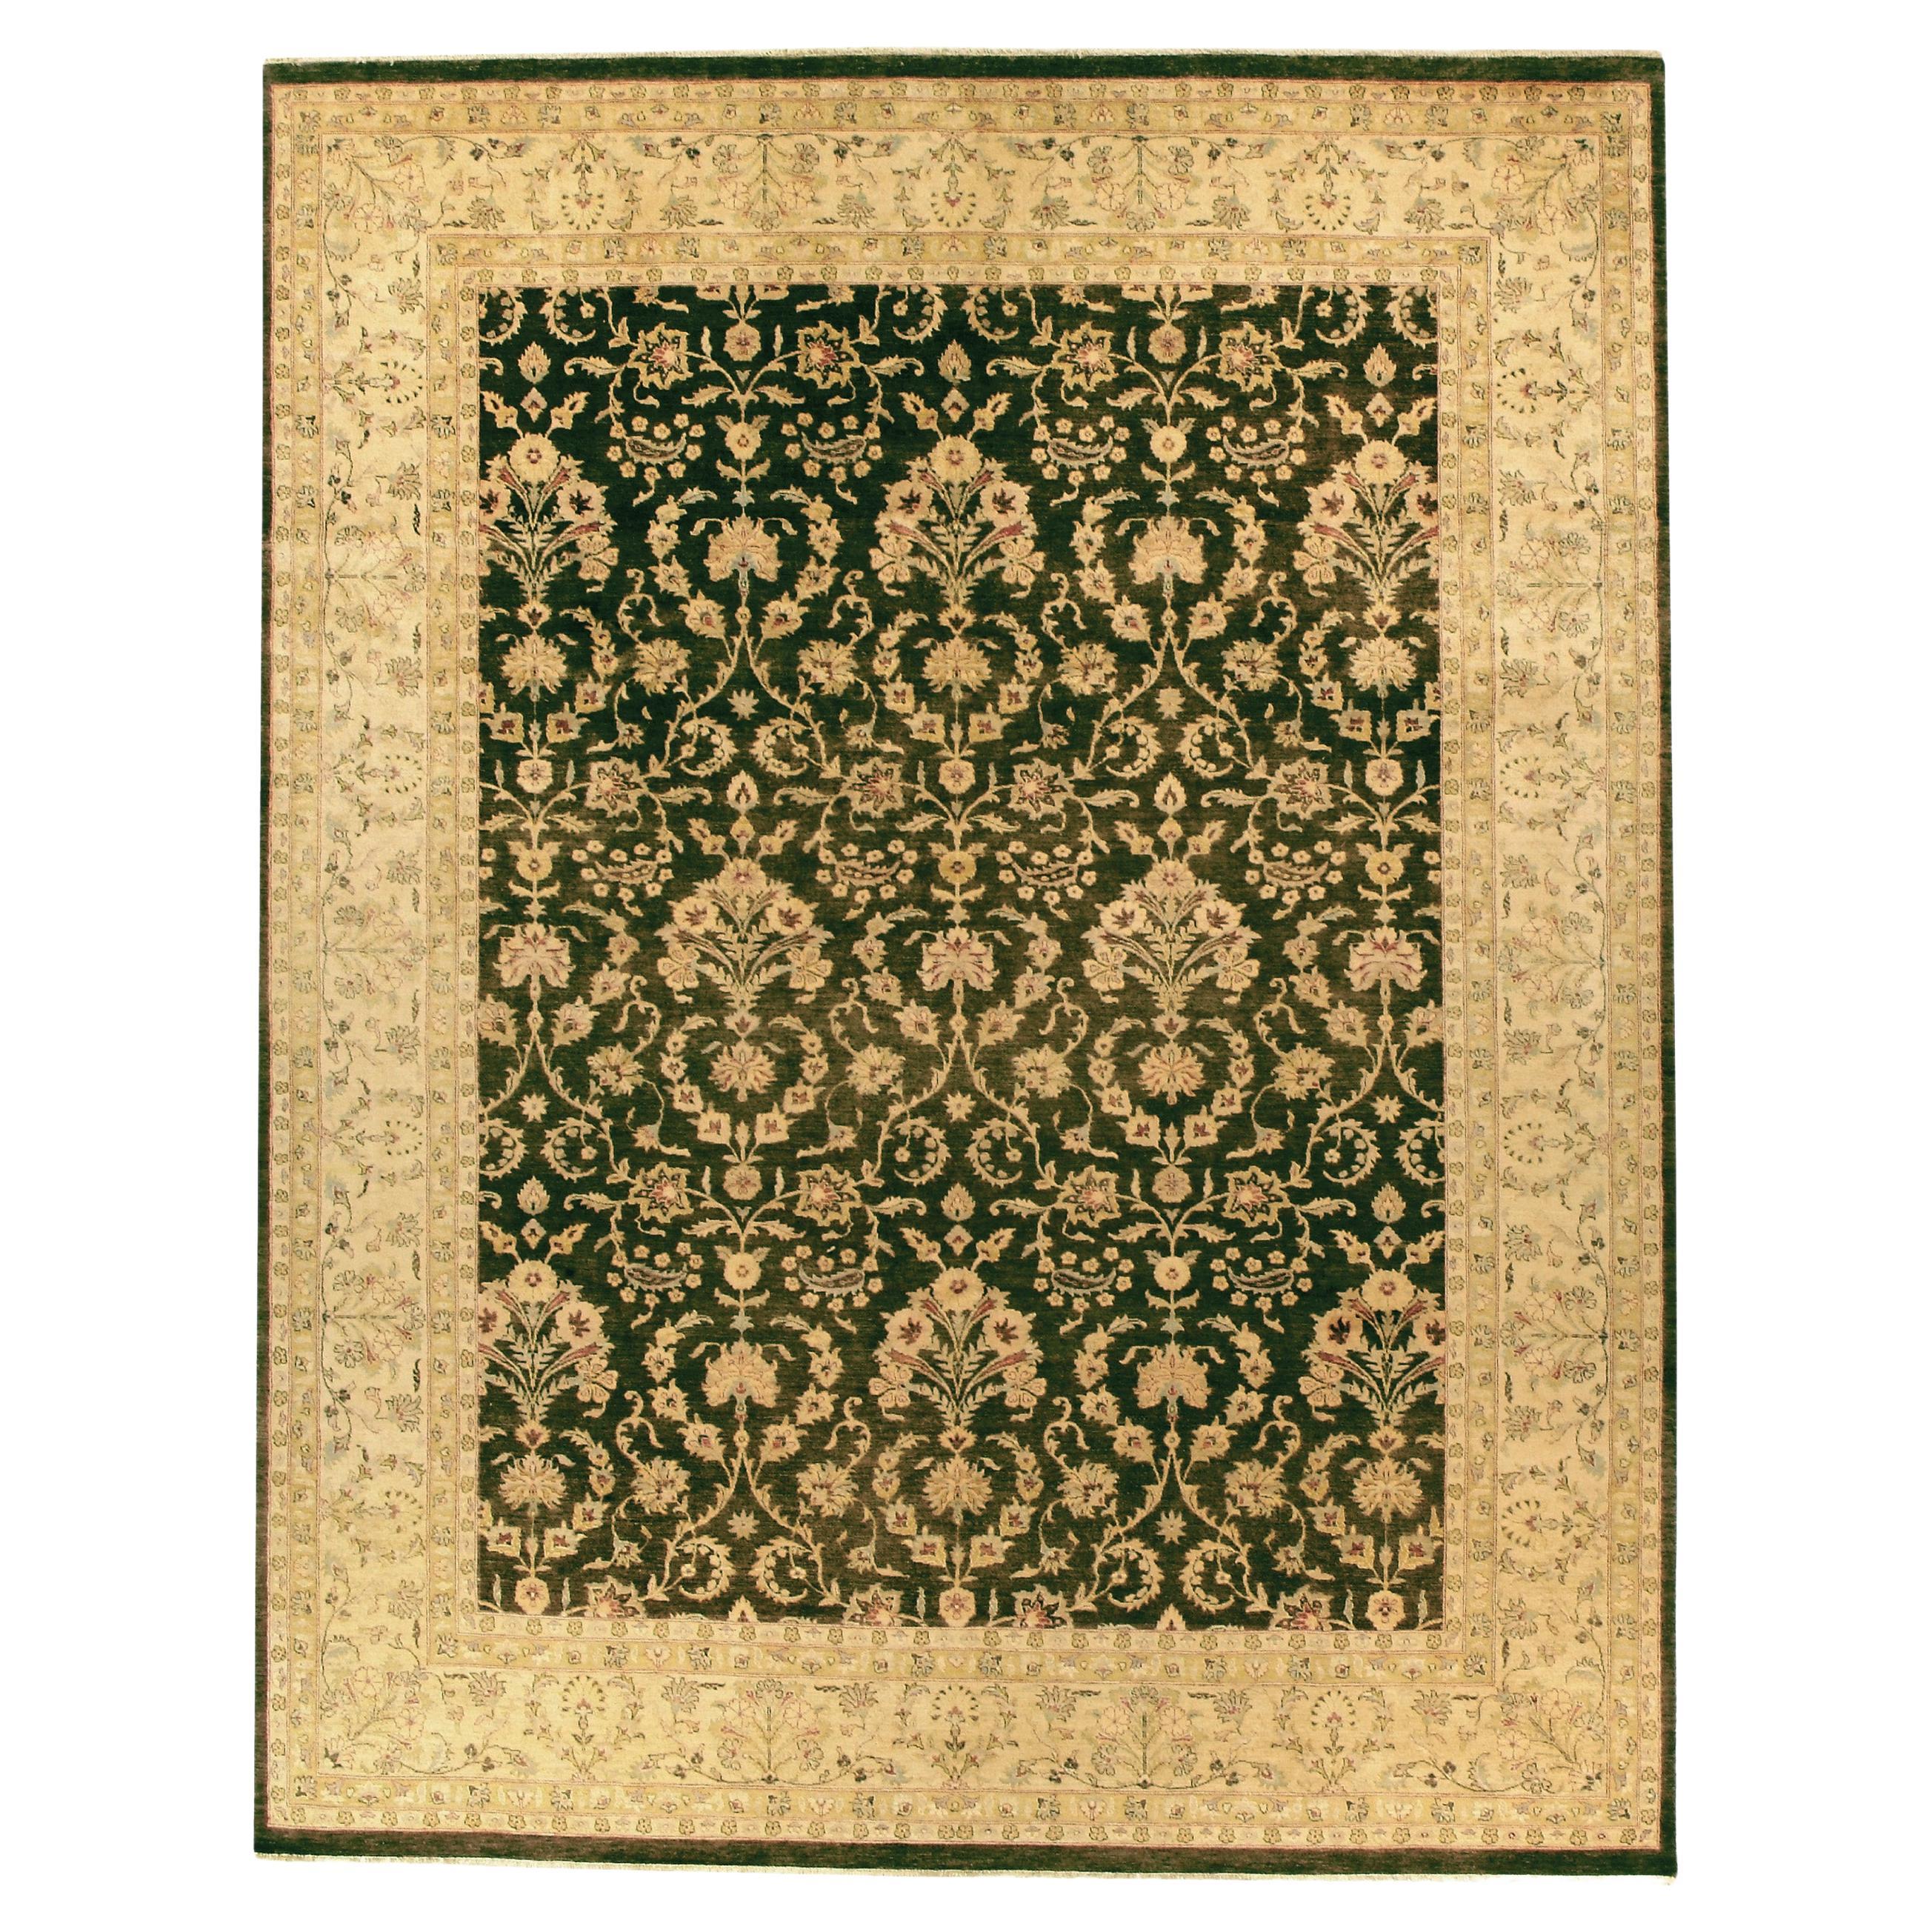 Luxury Traditional Hand-Knotted Meshed Brown/Cream 12x18 Rug